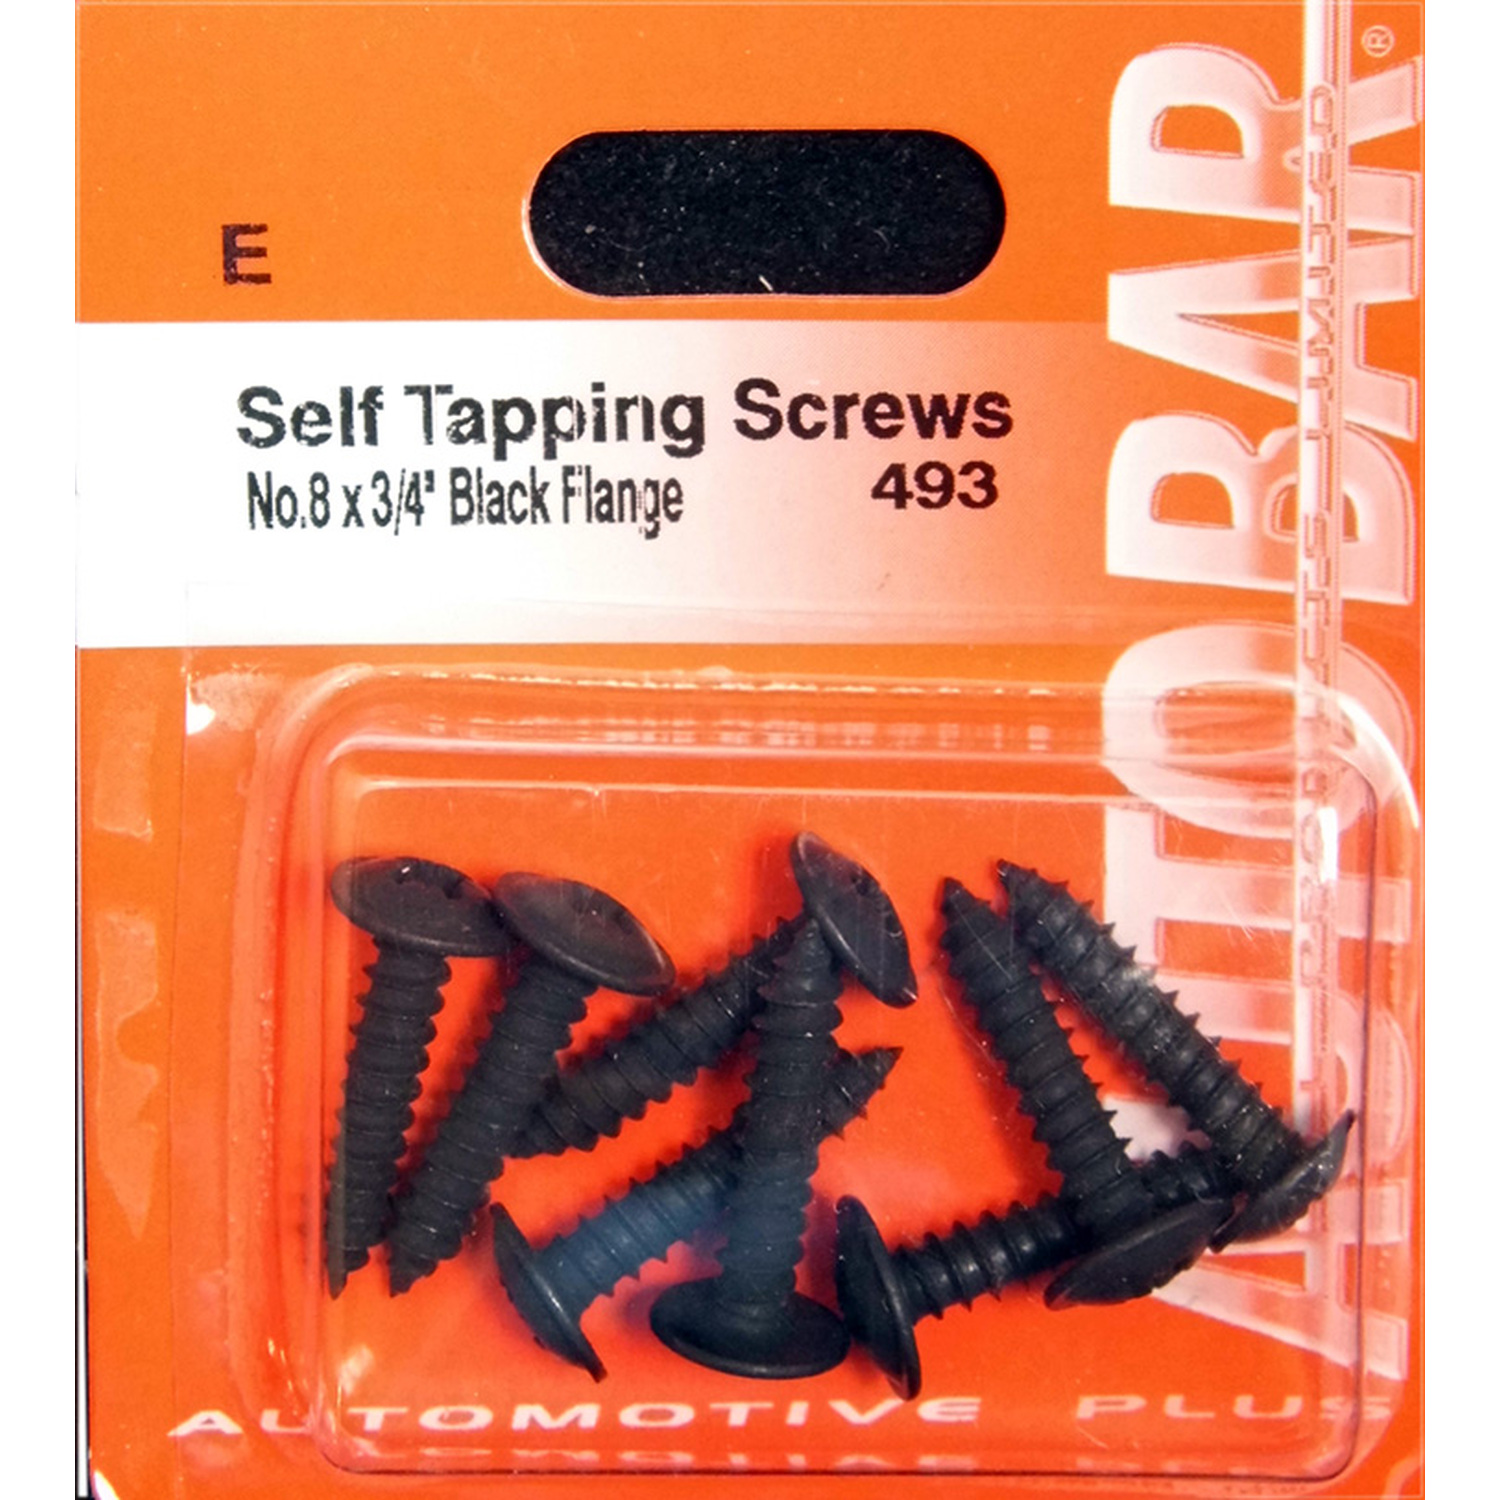 Autobar 0.75 inch Black Flanged Self Tapping Screws 8 Pack Image